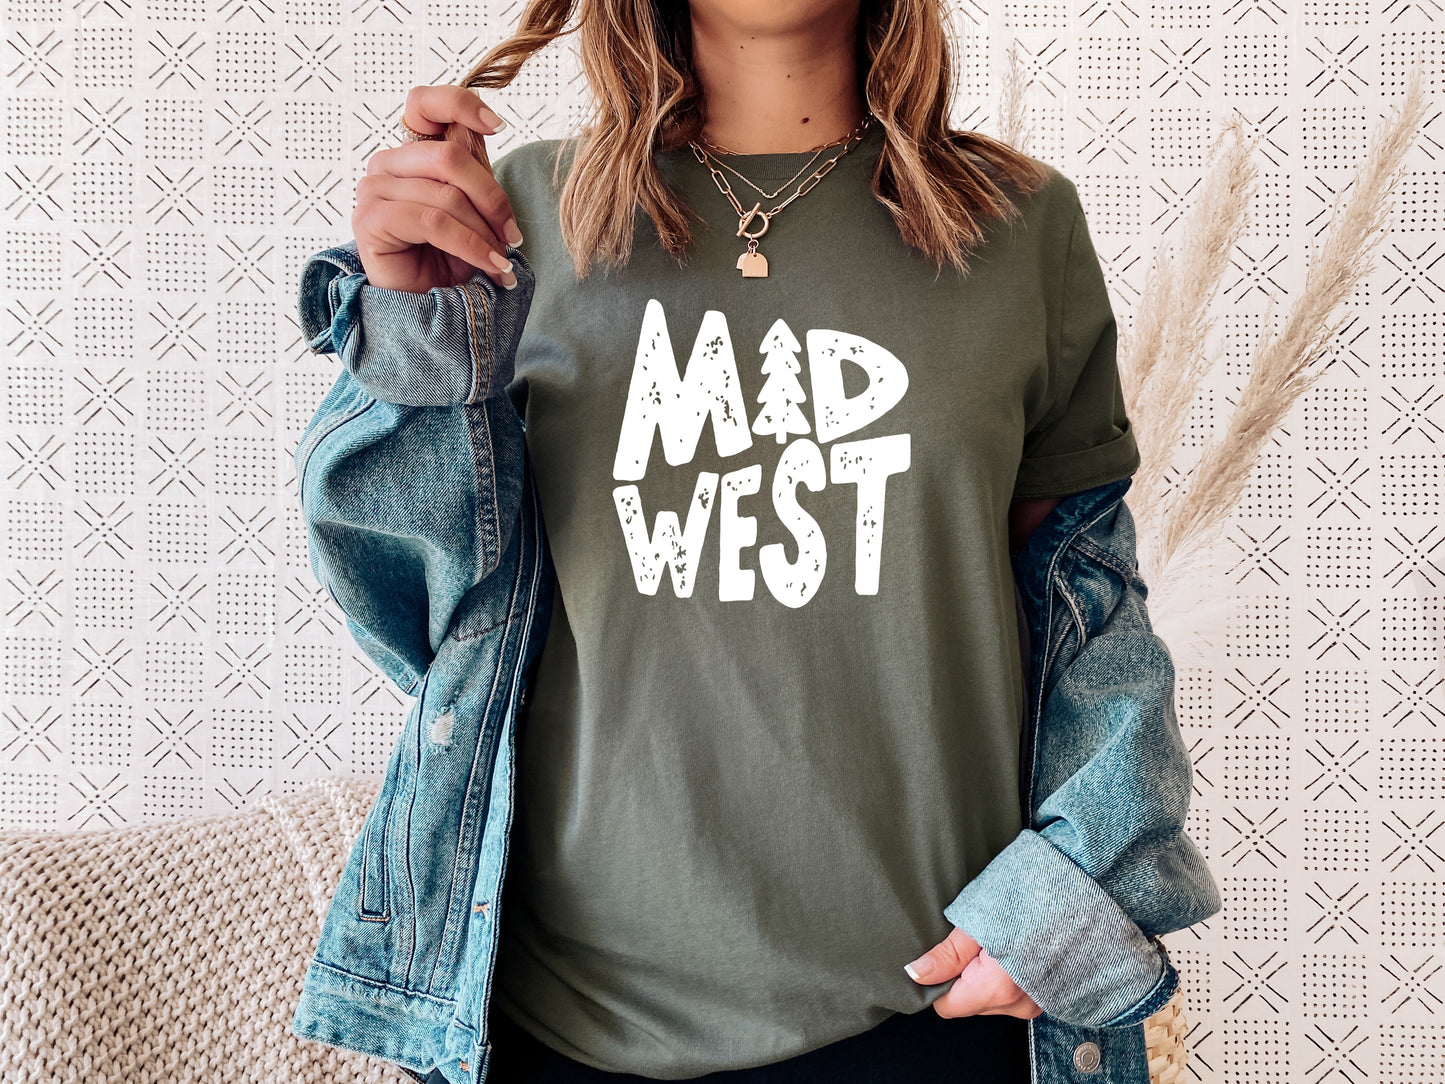 Midwest Pine Tee